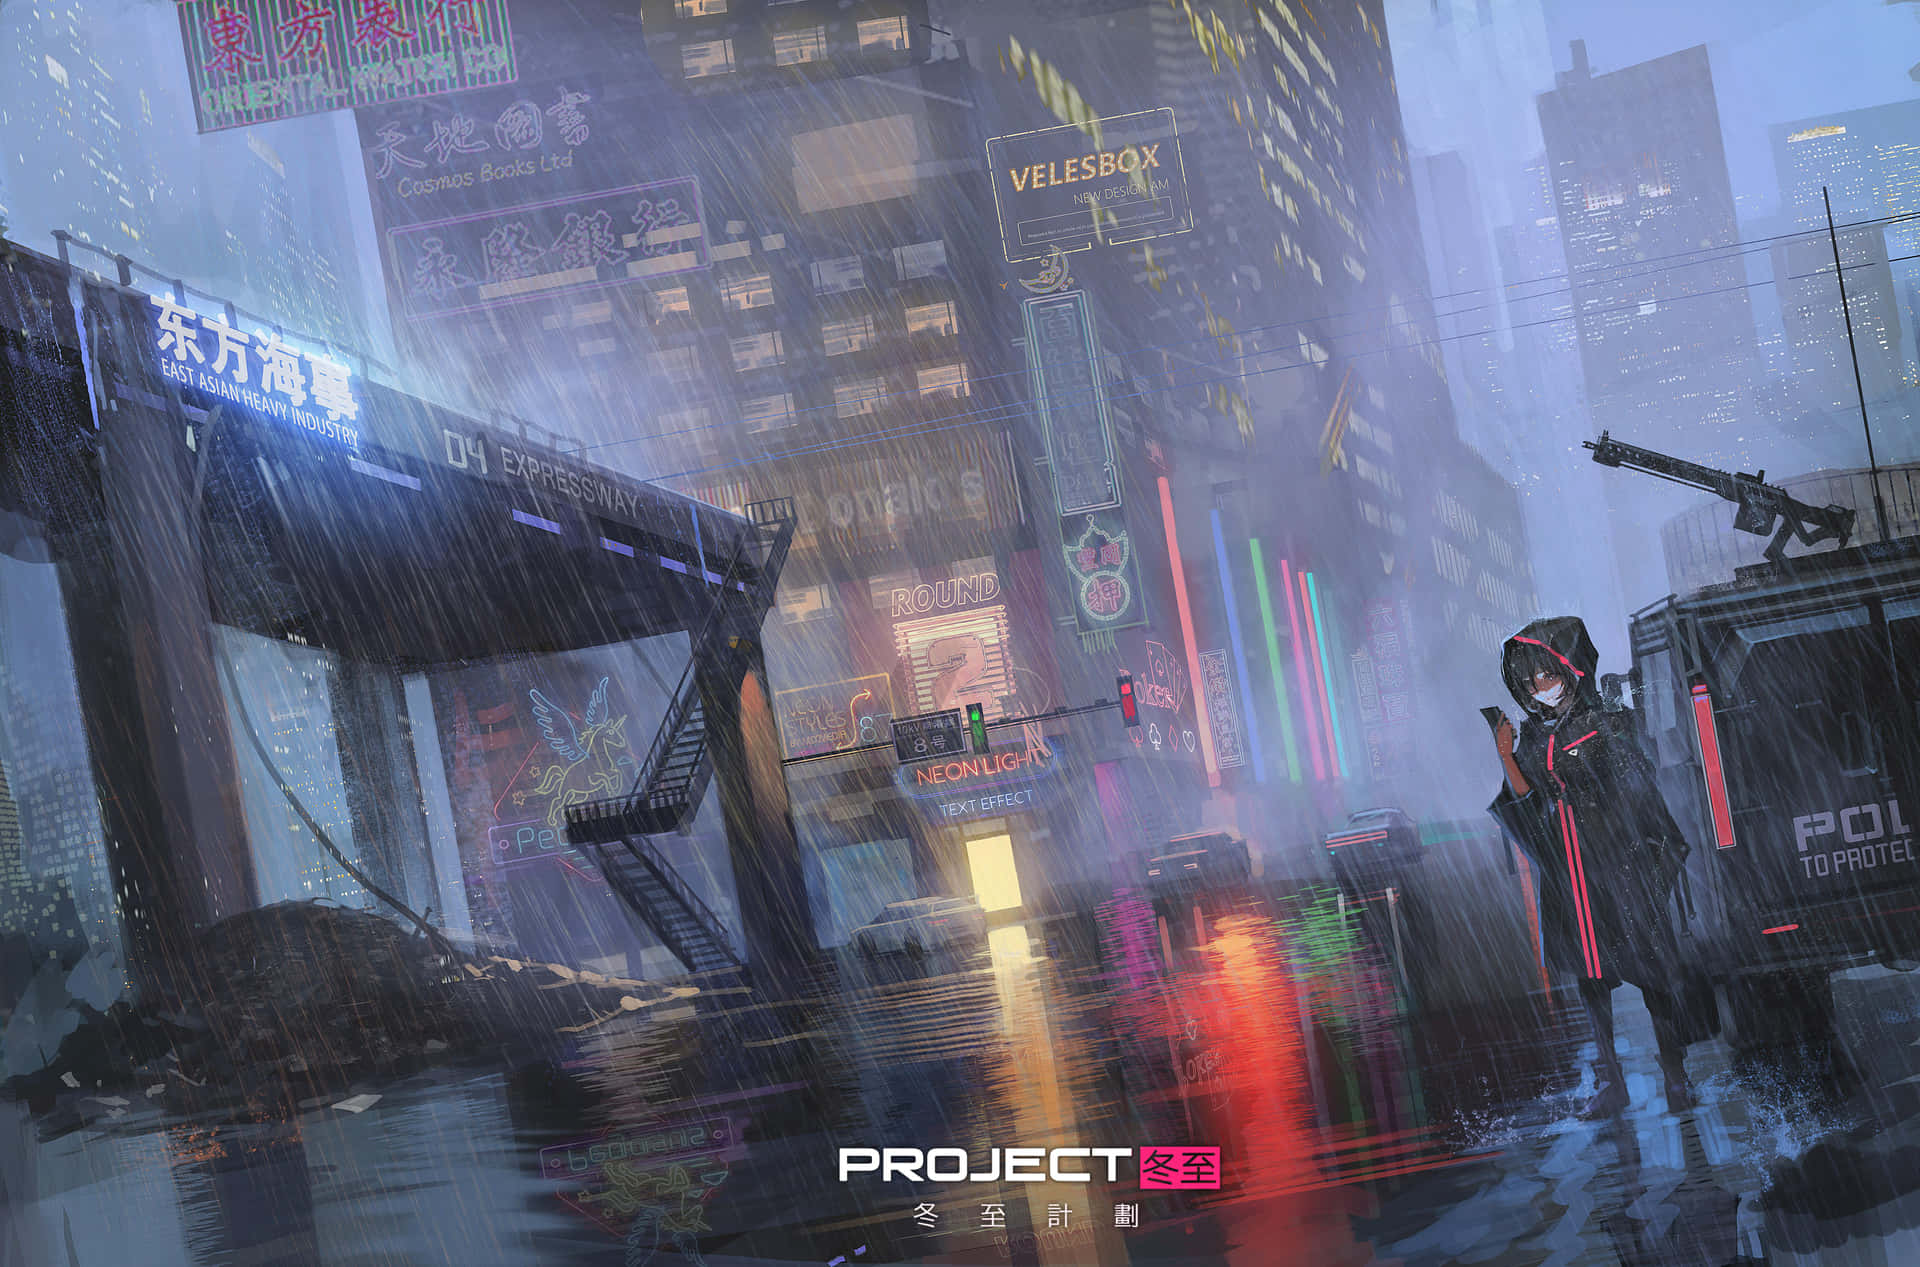 Project Iii - A City In The Rain Wallpaper